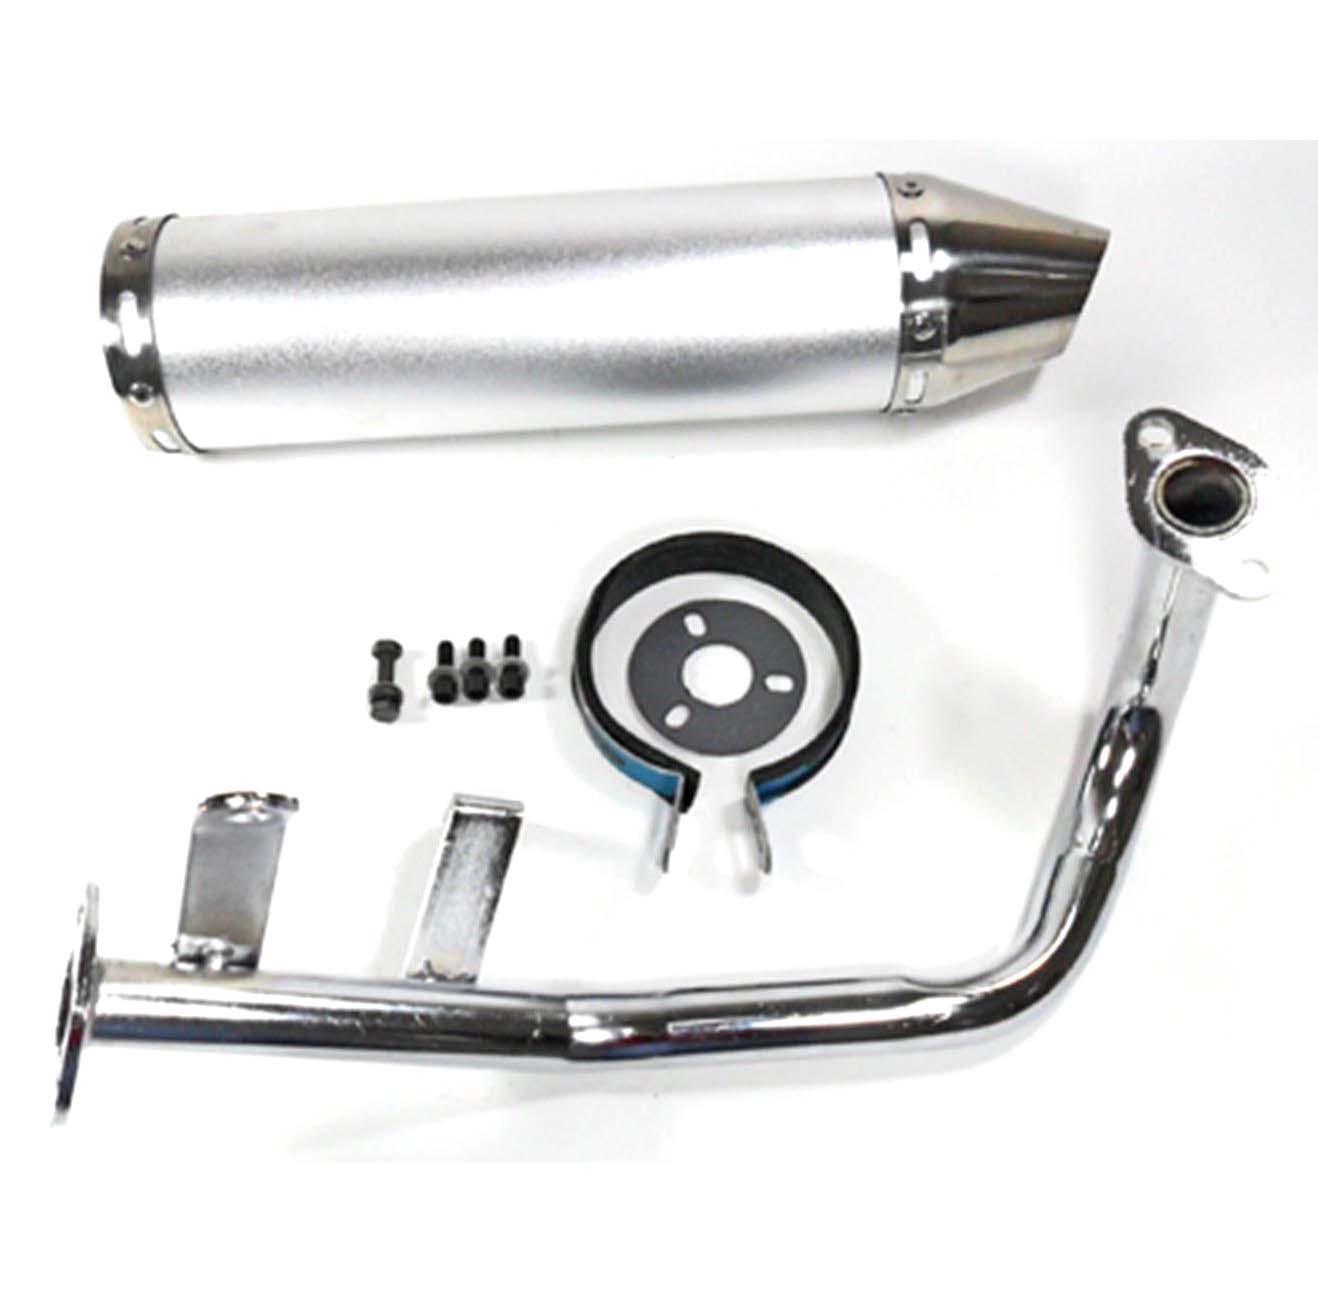 Exhaust Pipe HIGH PERFORMANCE CHROME Fits Most GY6-50 QMB139 49cc Chinese Scooter Motors Canister L=300mm D=88mm